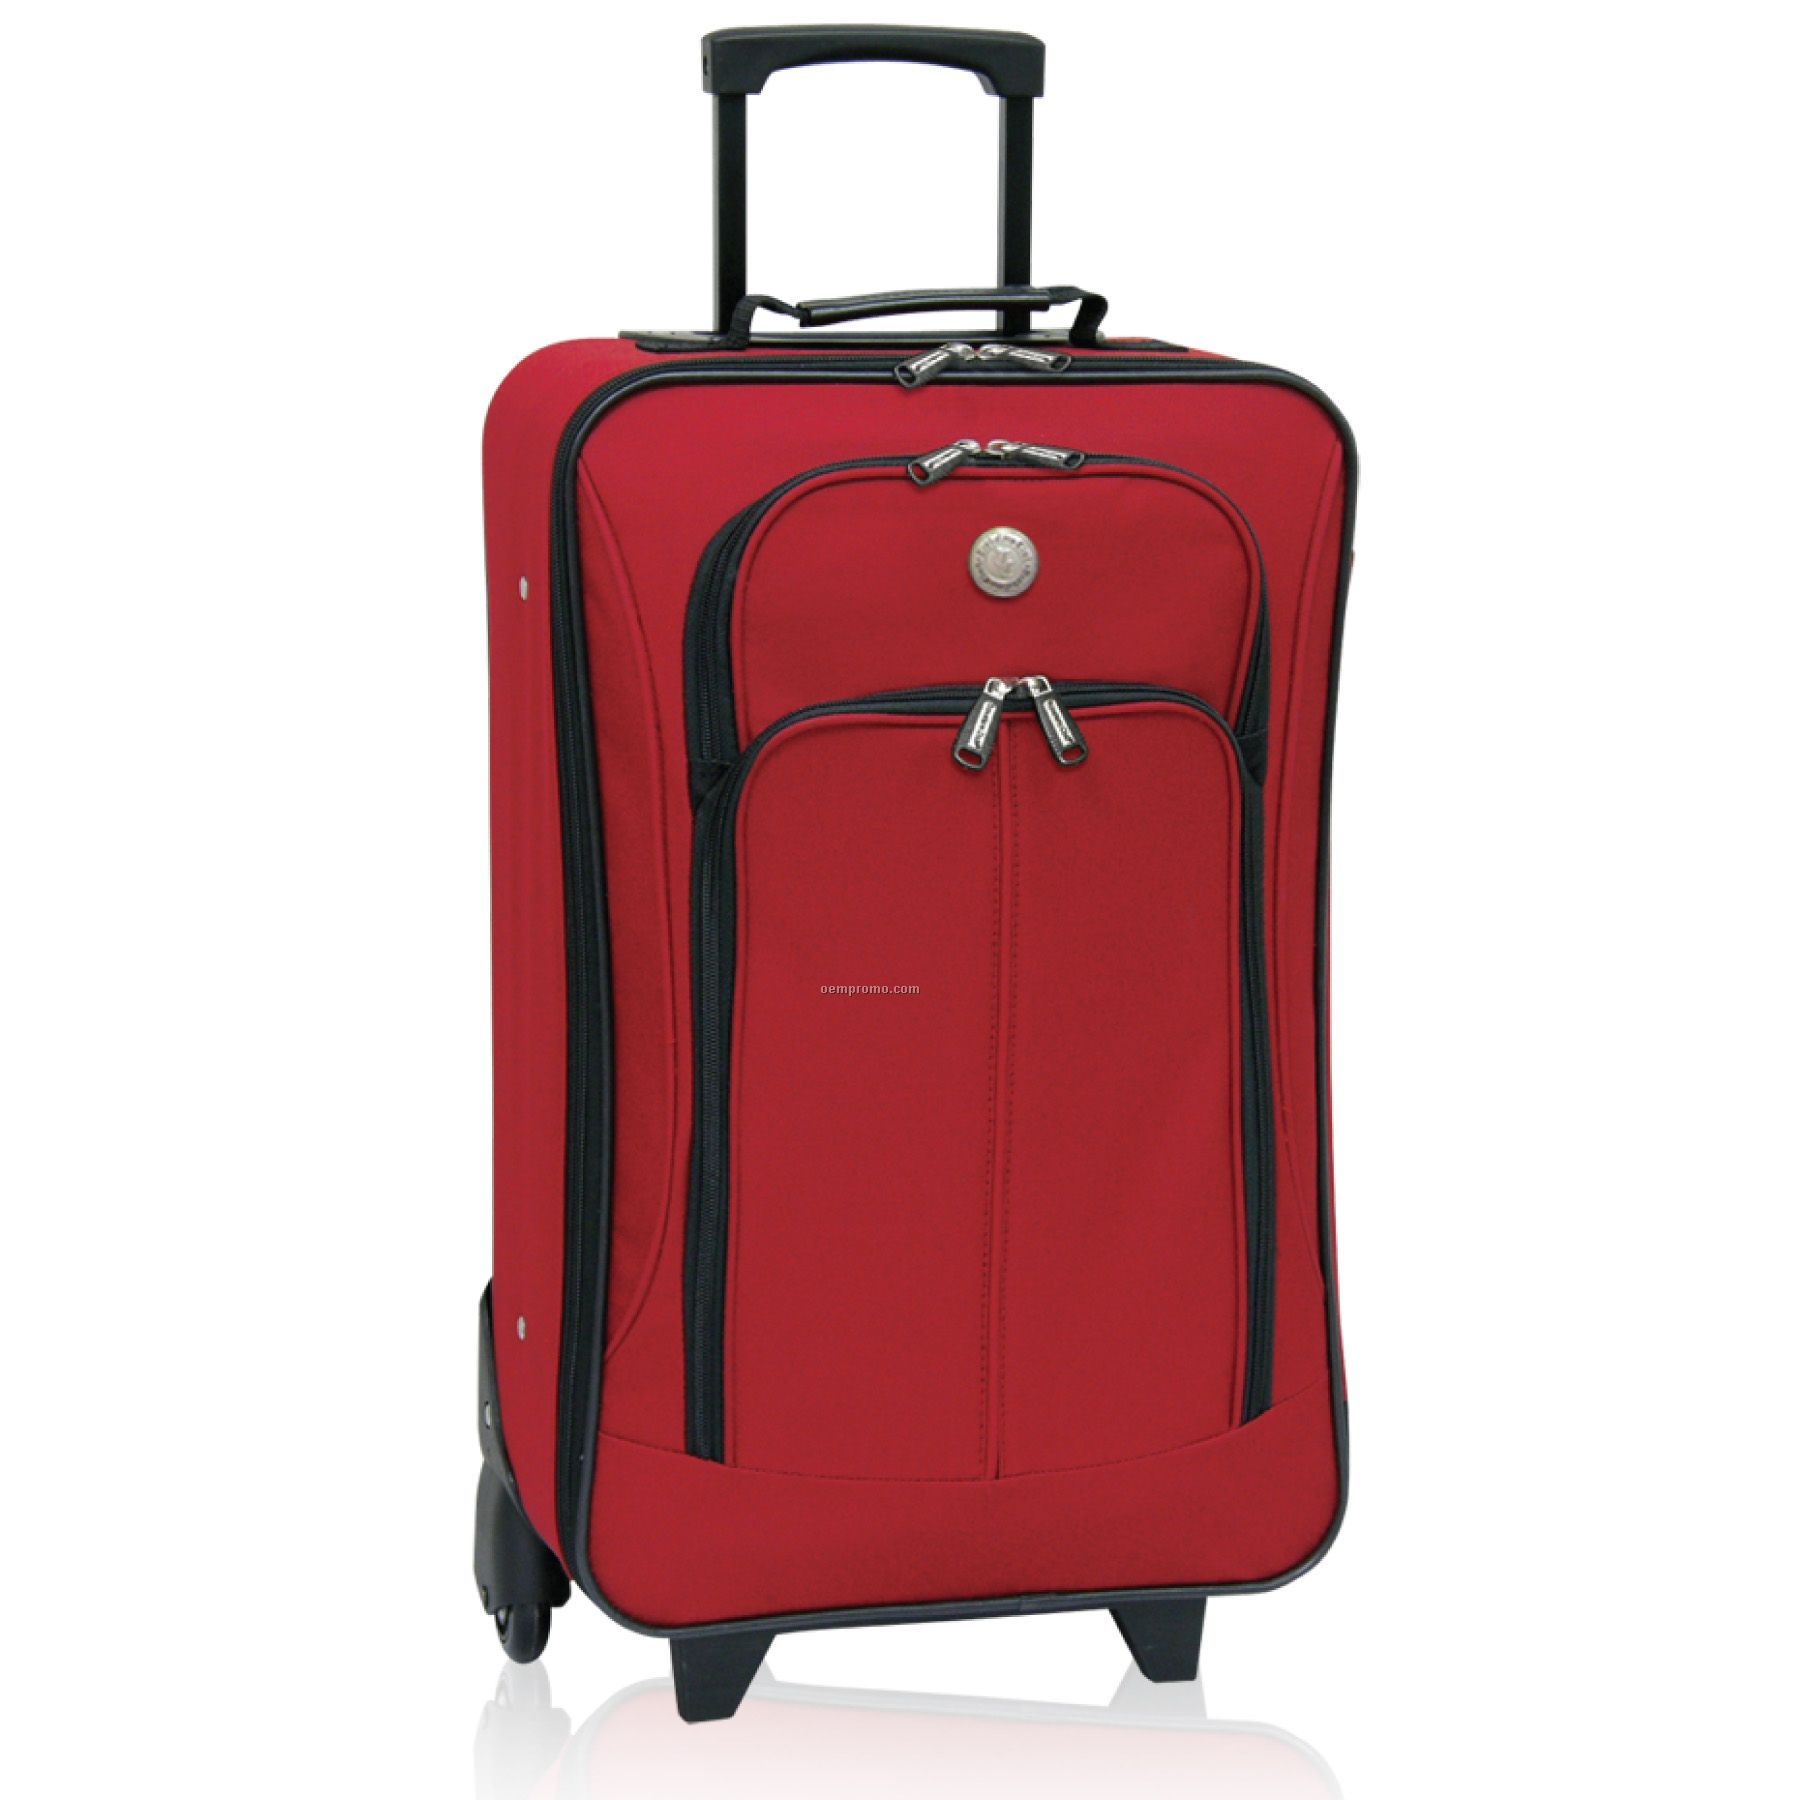 "Euro Value II" Collection - 20' Carry-on